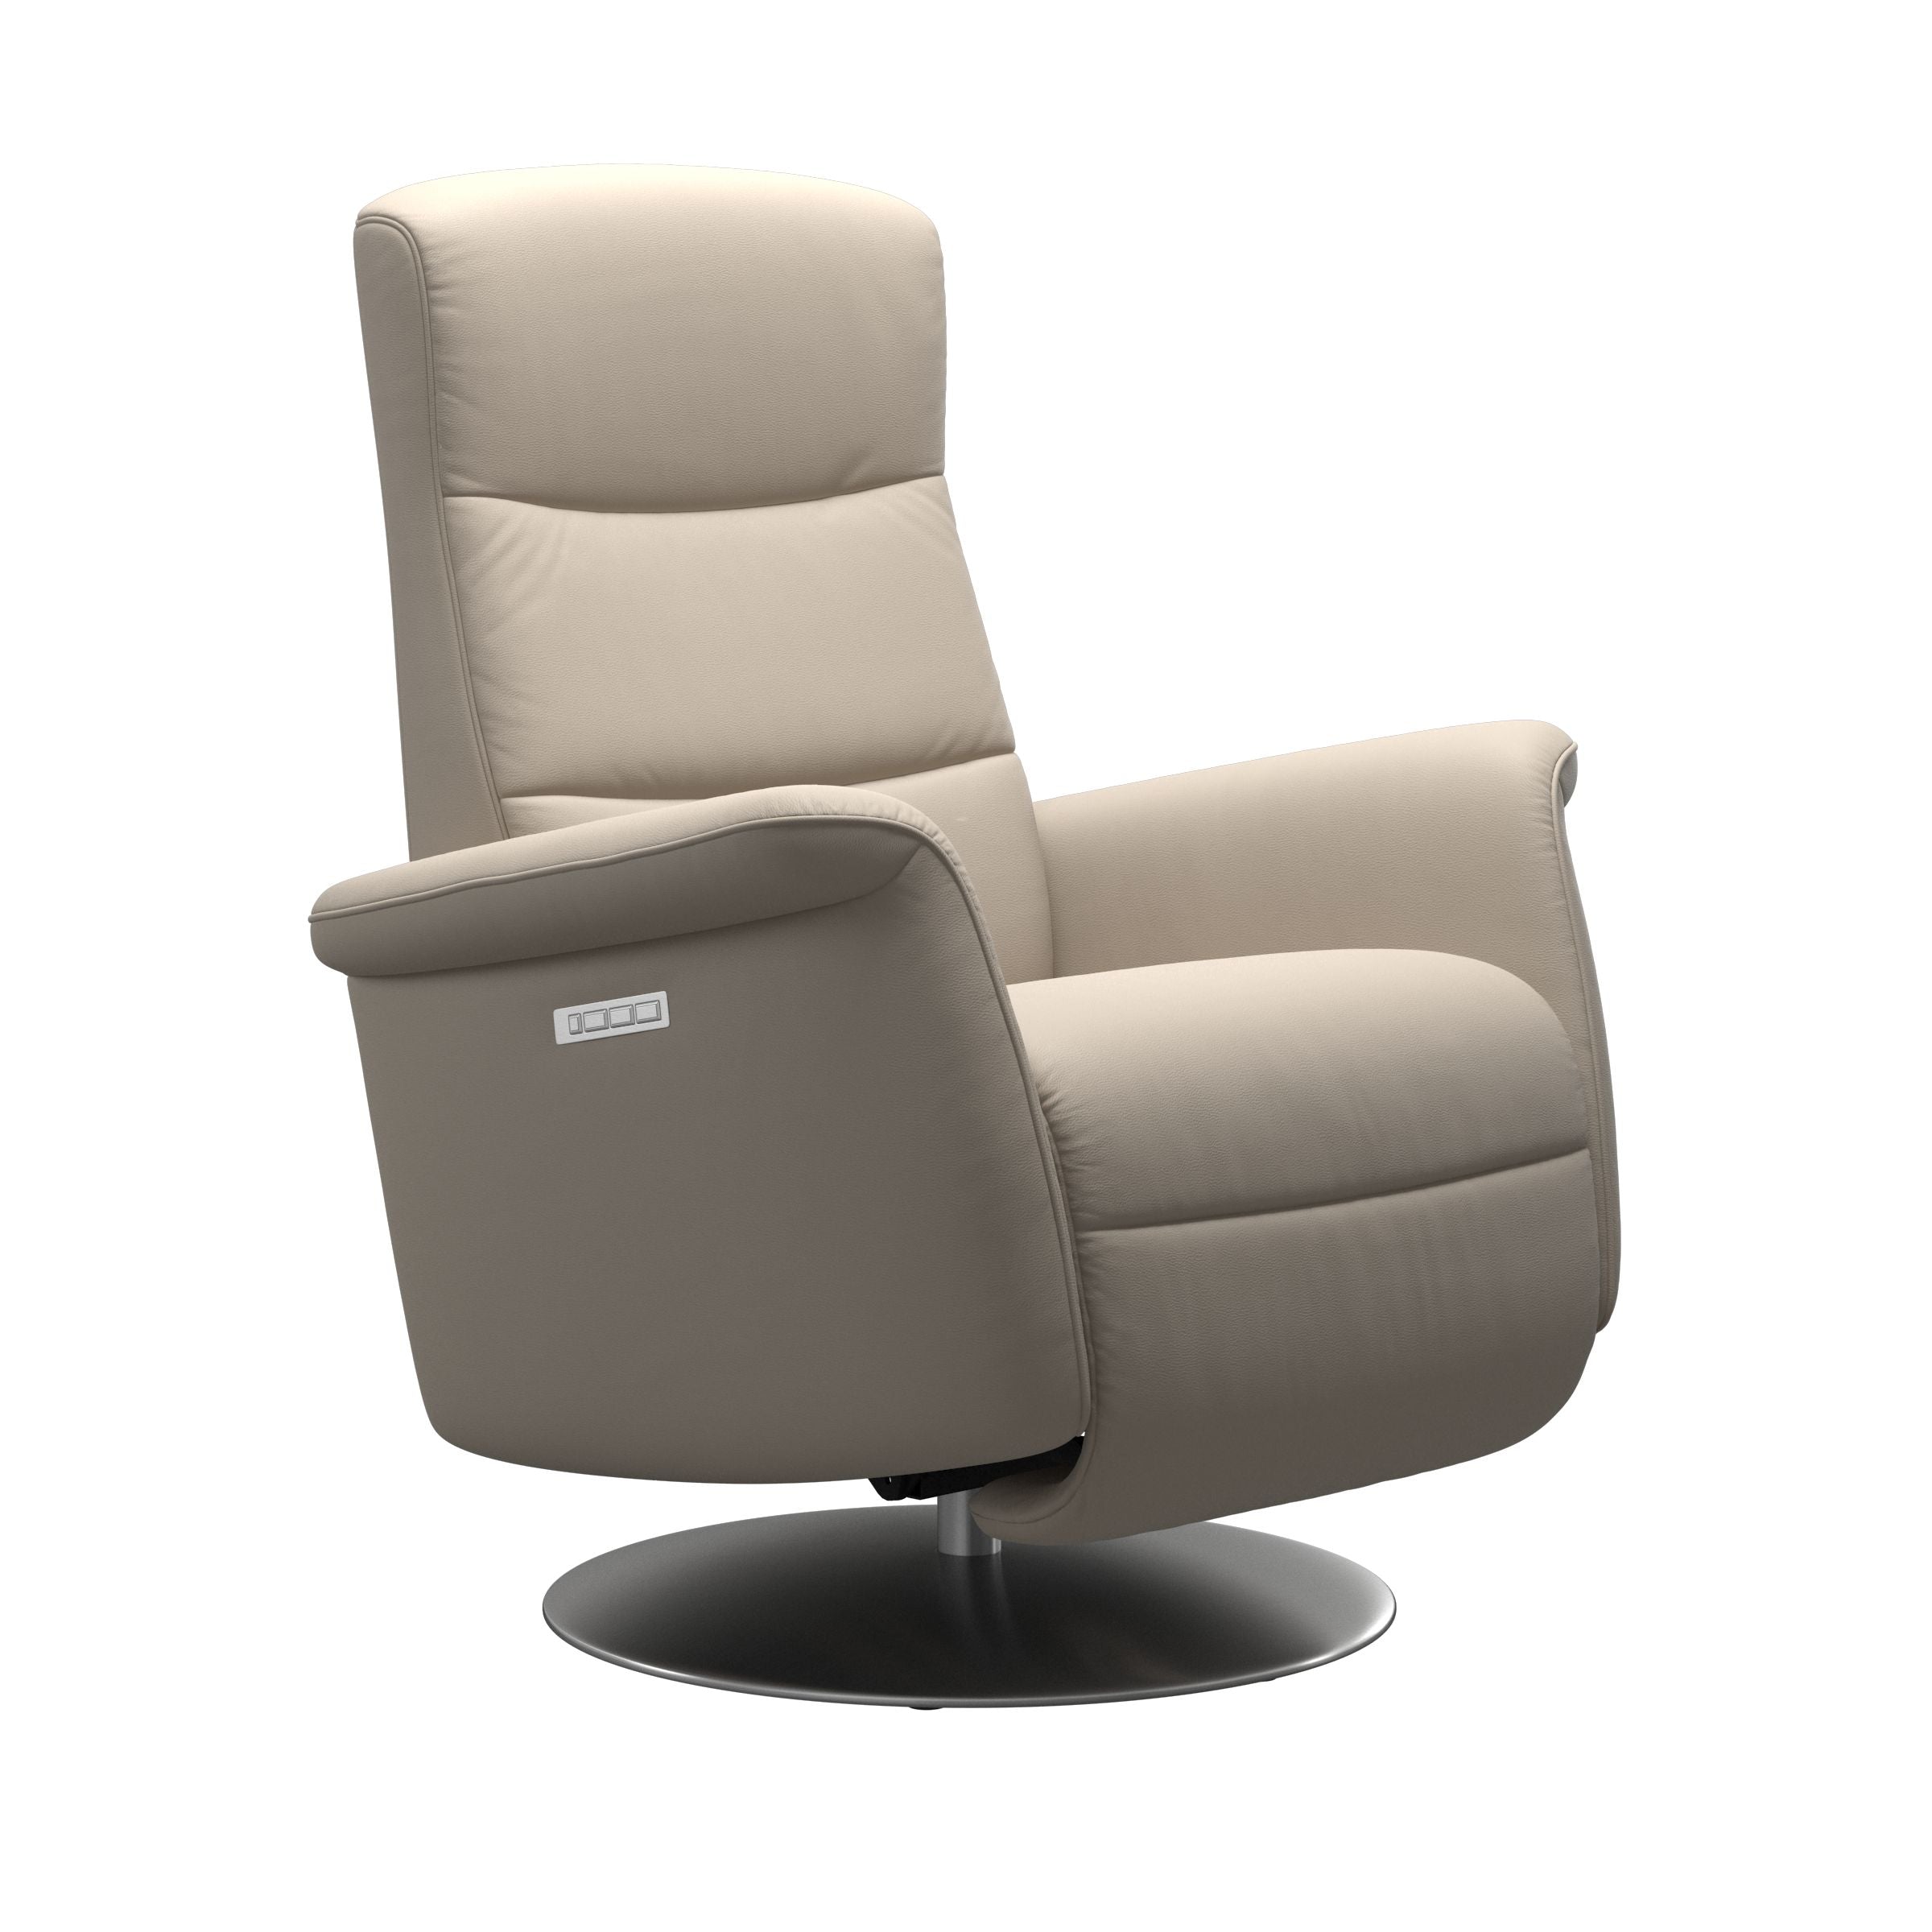 Stressless Mike Medium Recliner with Steel Moon Base